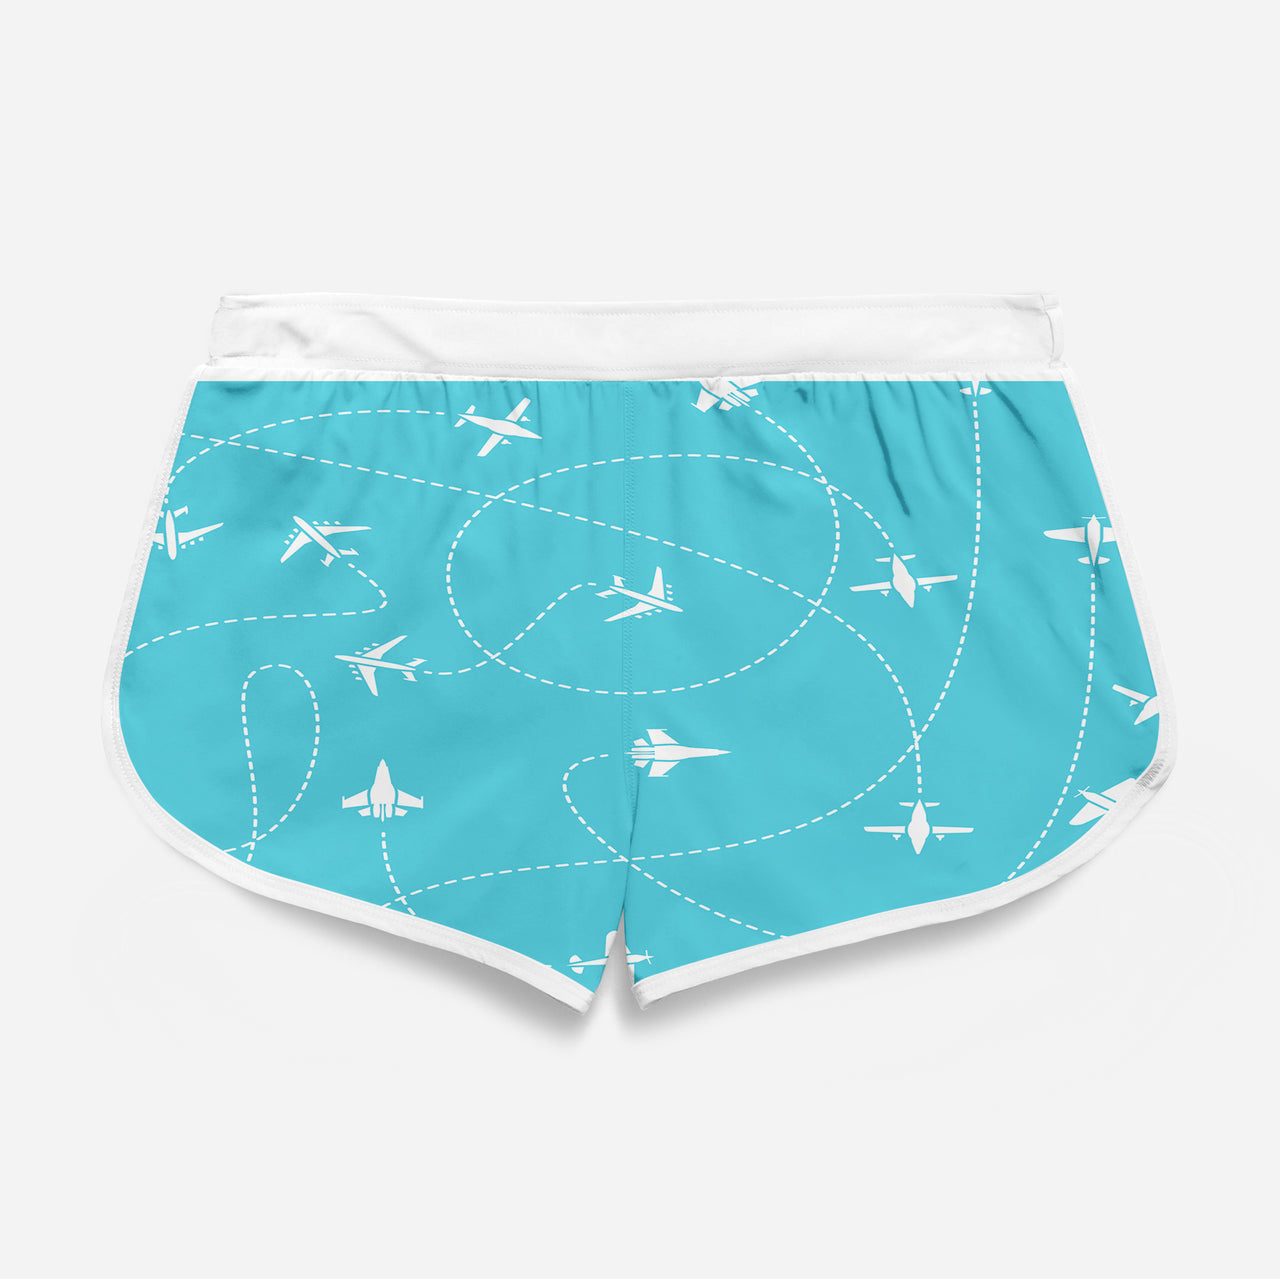 Travel The The World By Plane Designed Women Beach Style Shorts